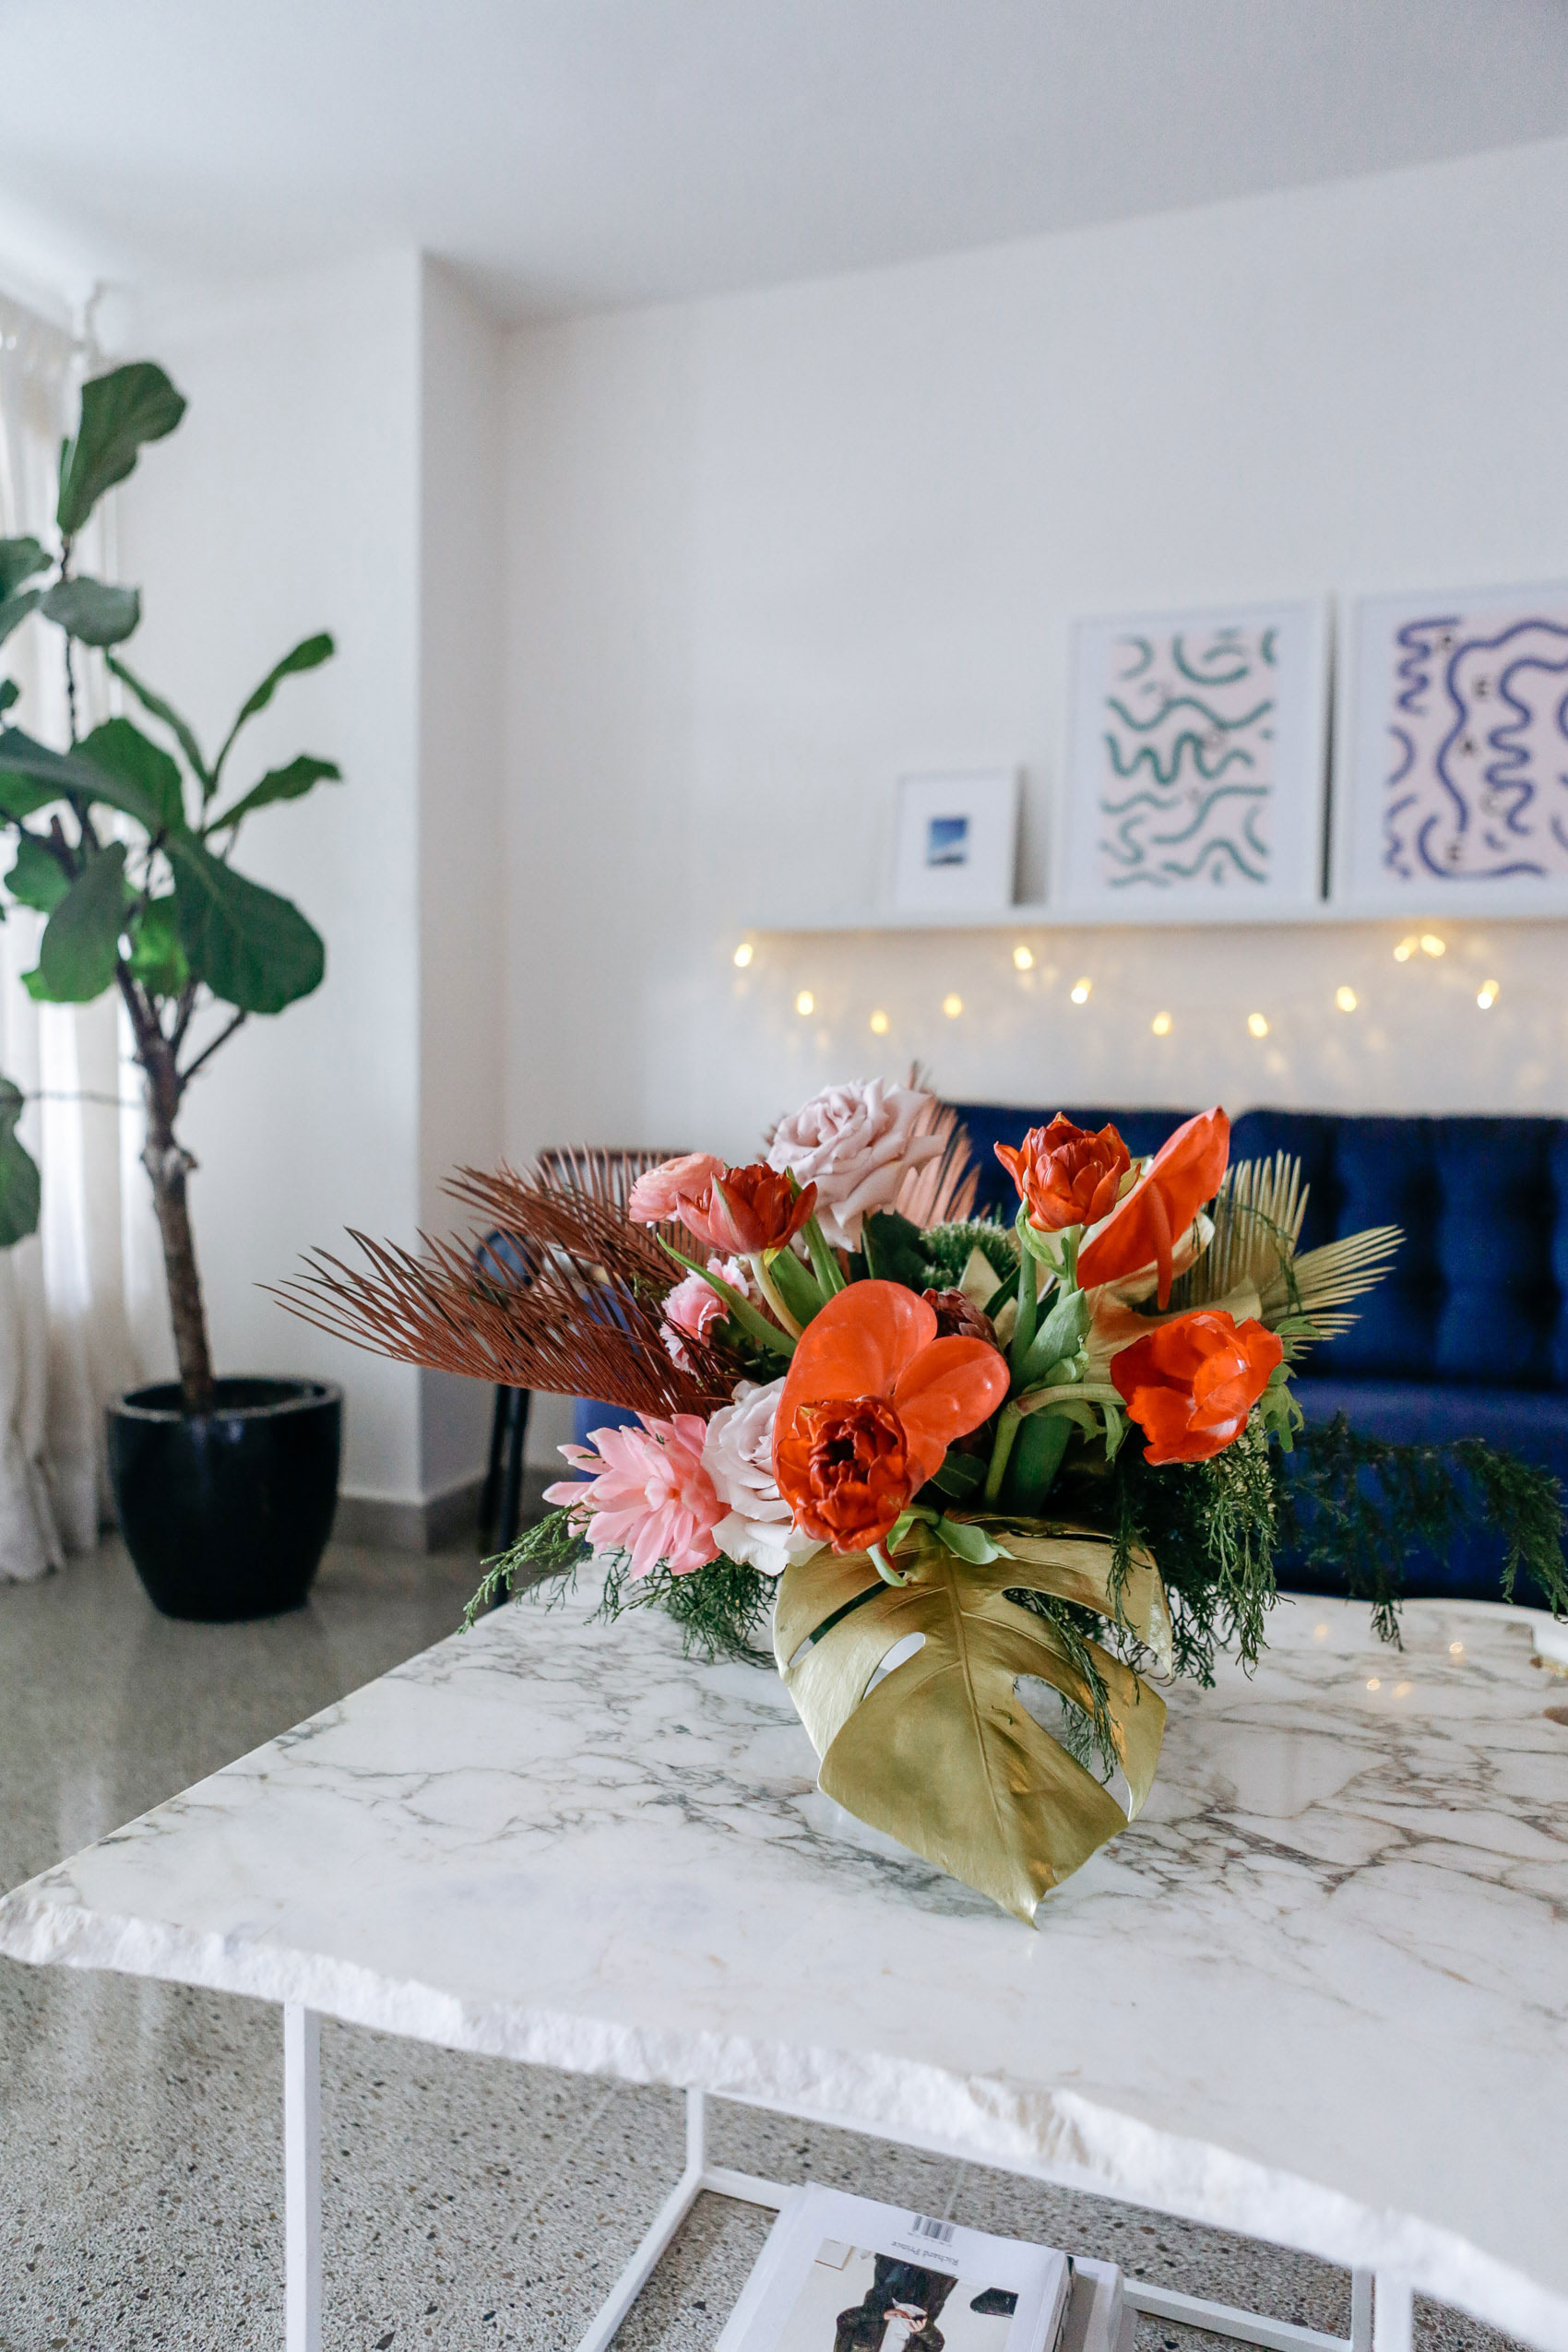 Minimal scandinavian and tropical mix decor for the Holidays